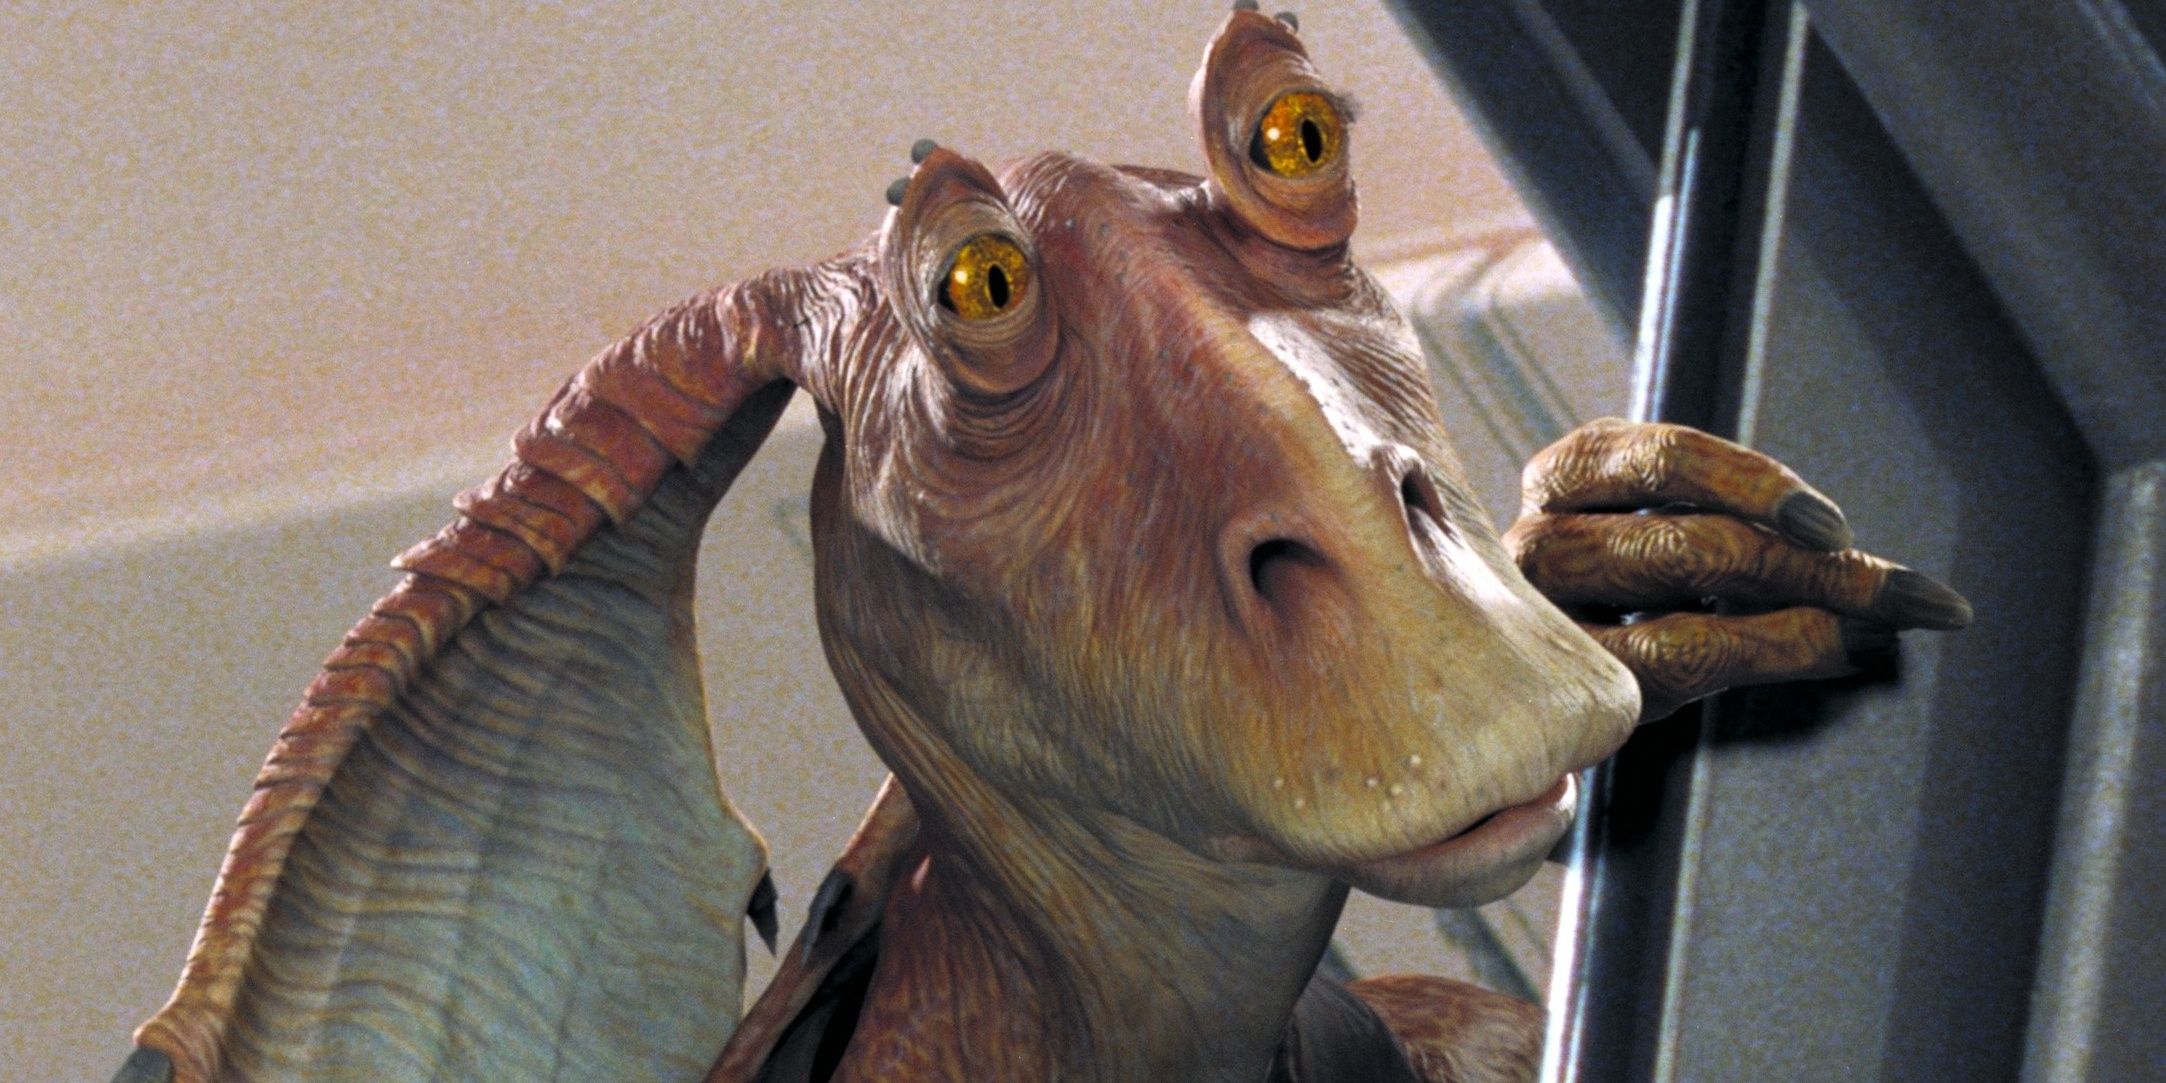 10 Great Things About the Star Wars Prequels